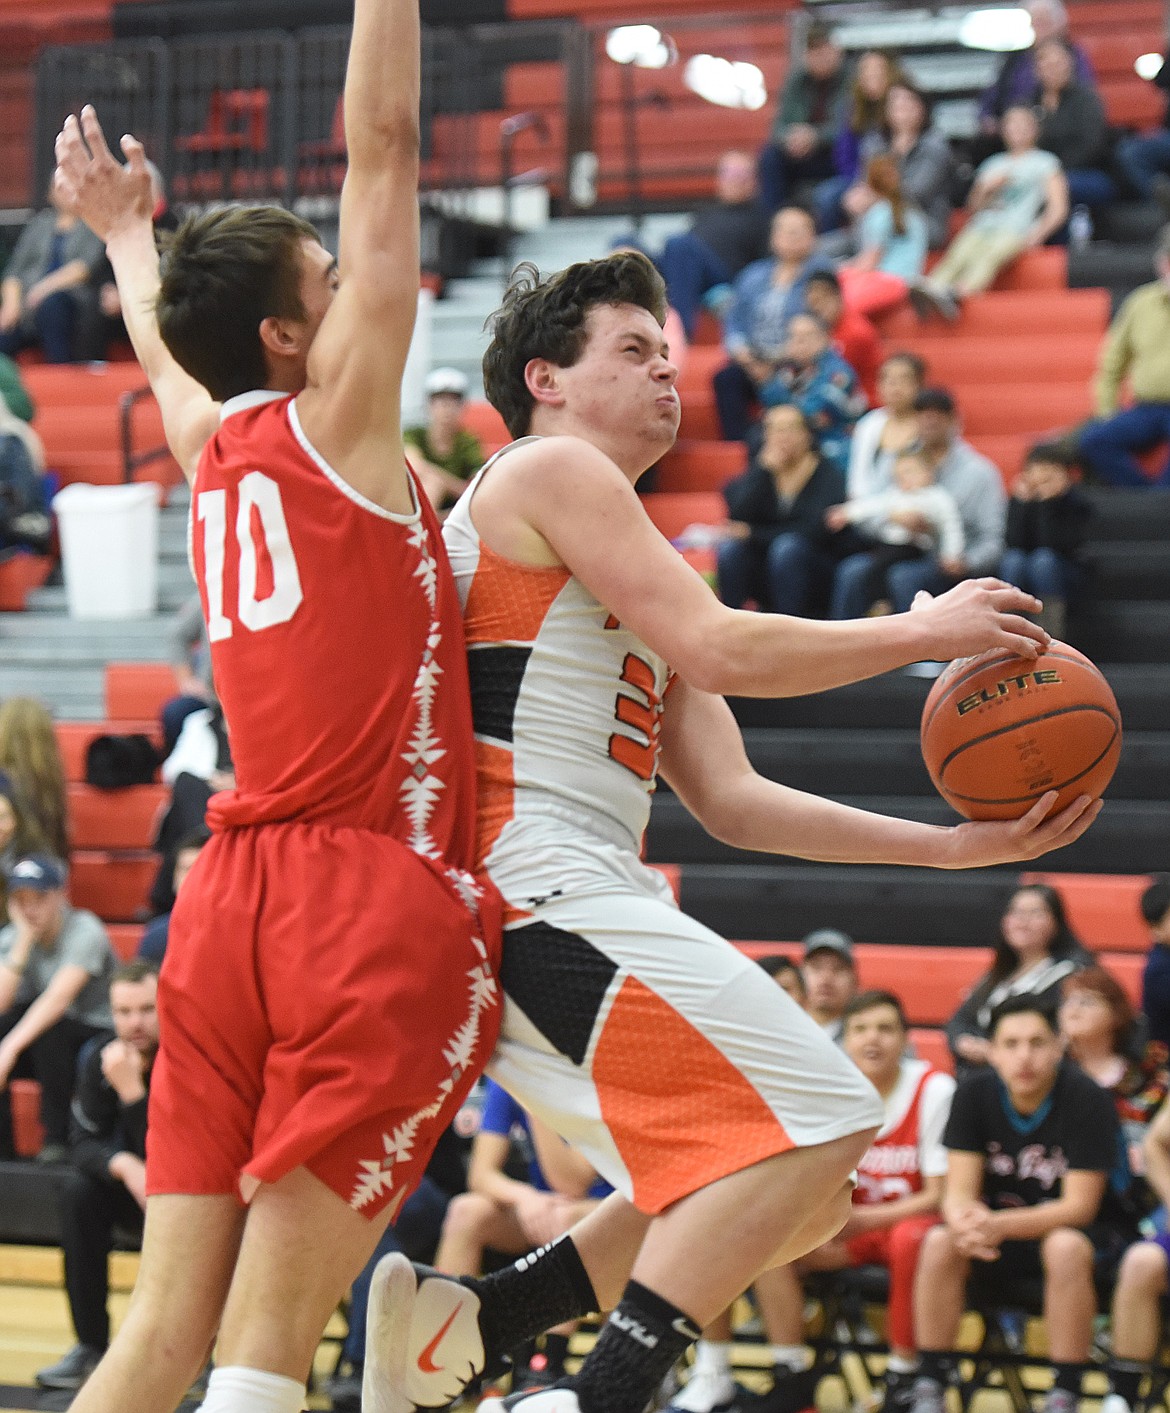 MATT McCRACKEN, a Plains senior, scoops the ball to the hoop past Lane Johnson of Arlee during the Mission Valley All-Star boys&#146; game in Ronan.